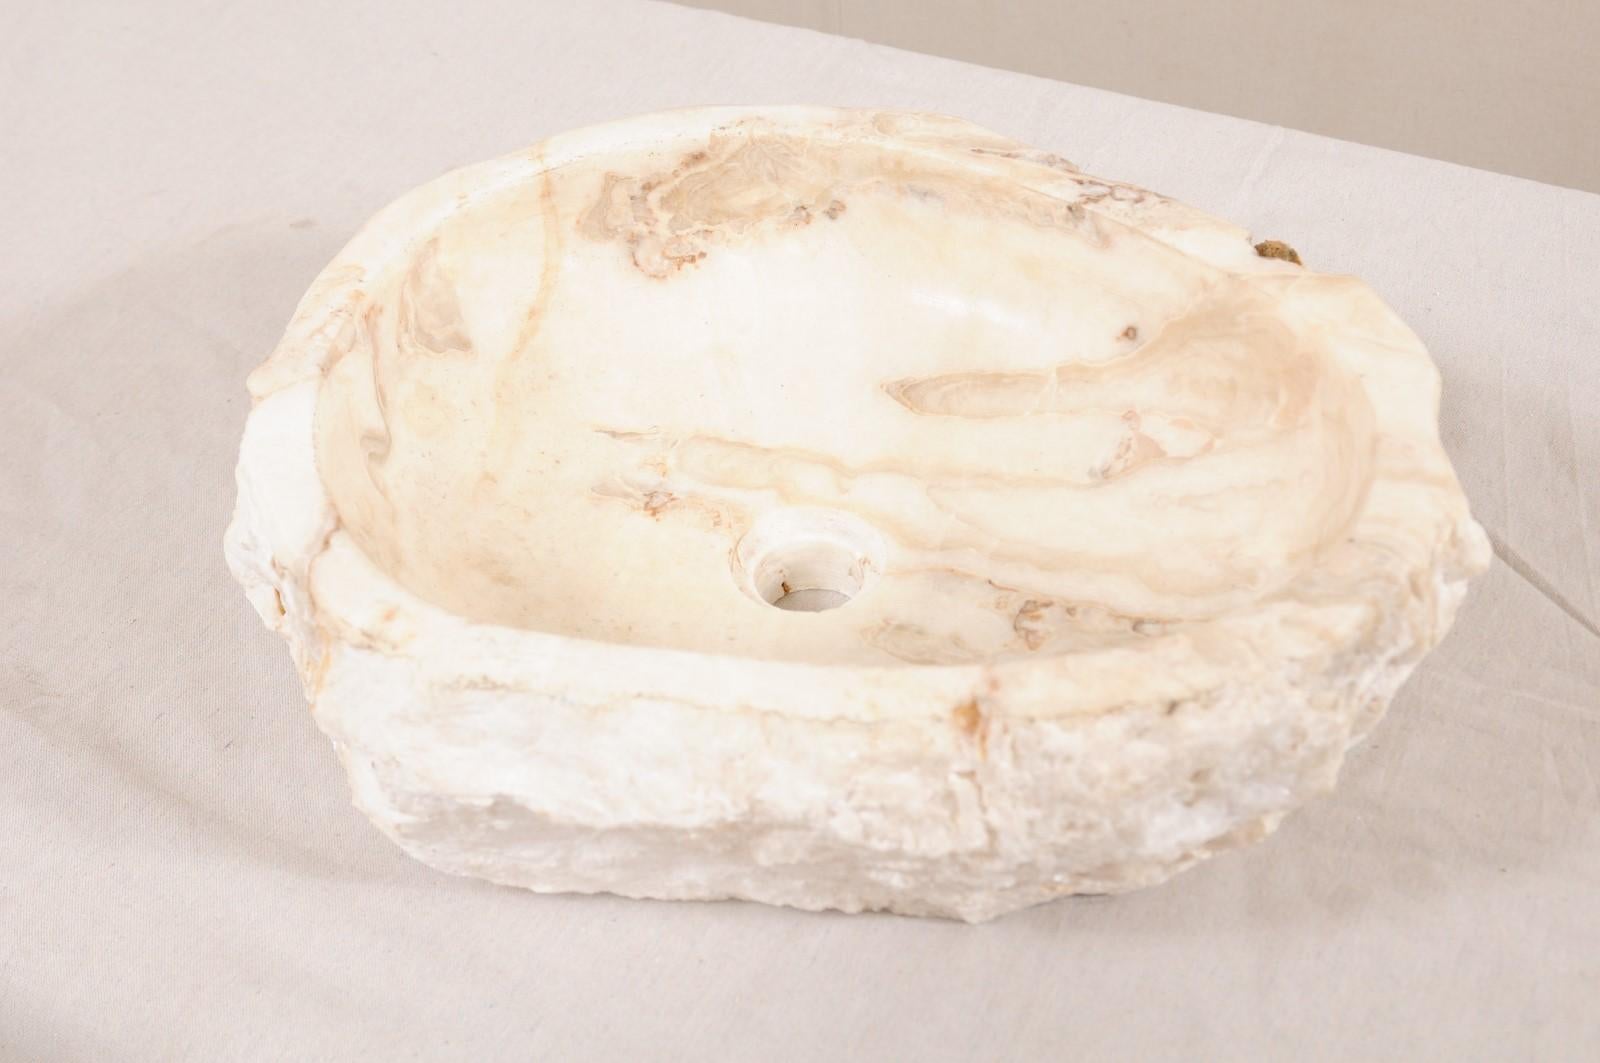 A single natural onyx sink basin with original live edge. This carved vessel sink, created from a rough onyx rock, has a carved and then polished interior basin, making for easy clean-up. The natural textured stone remains about the exterior of the